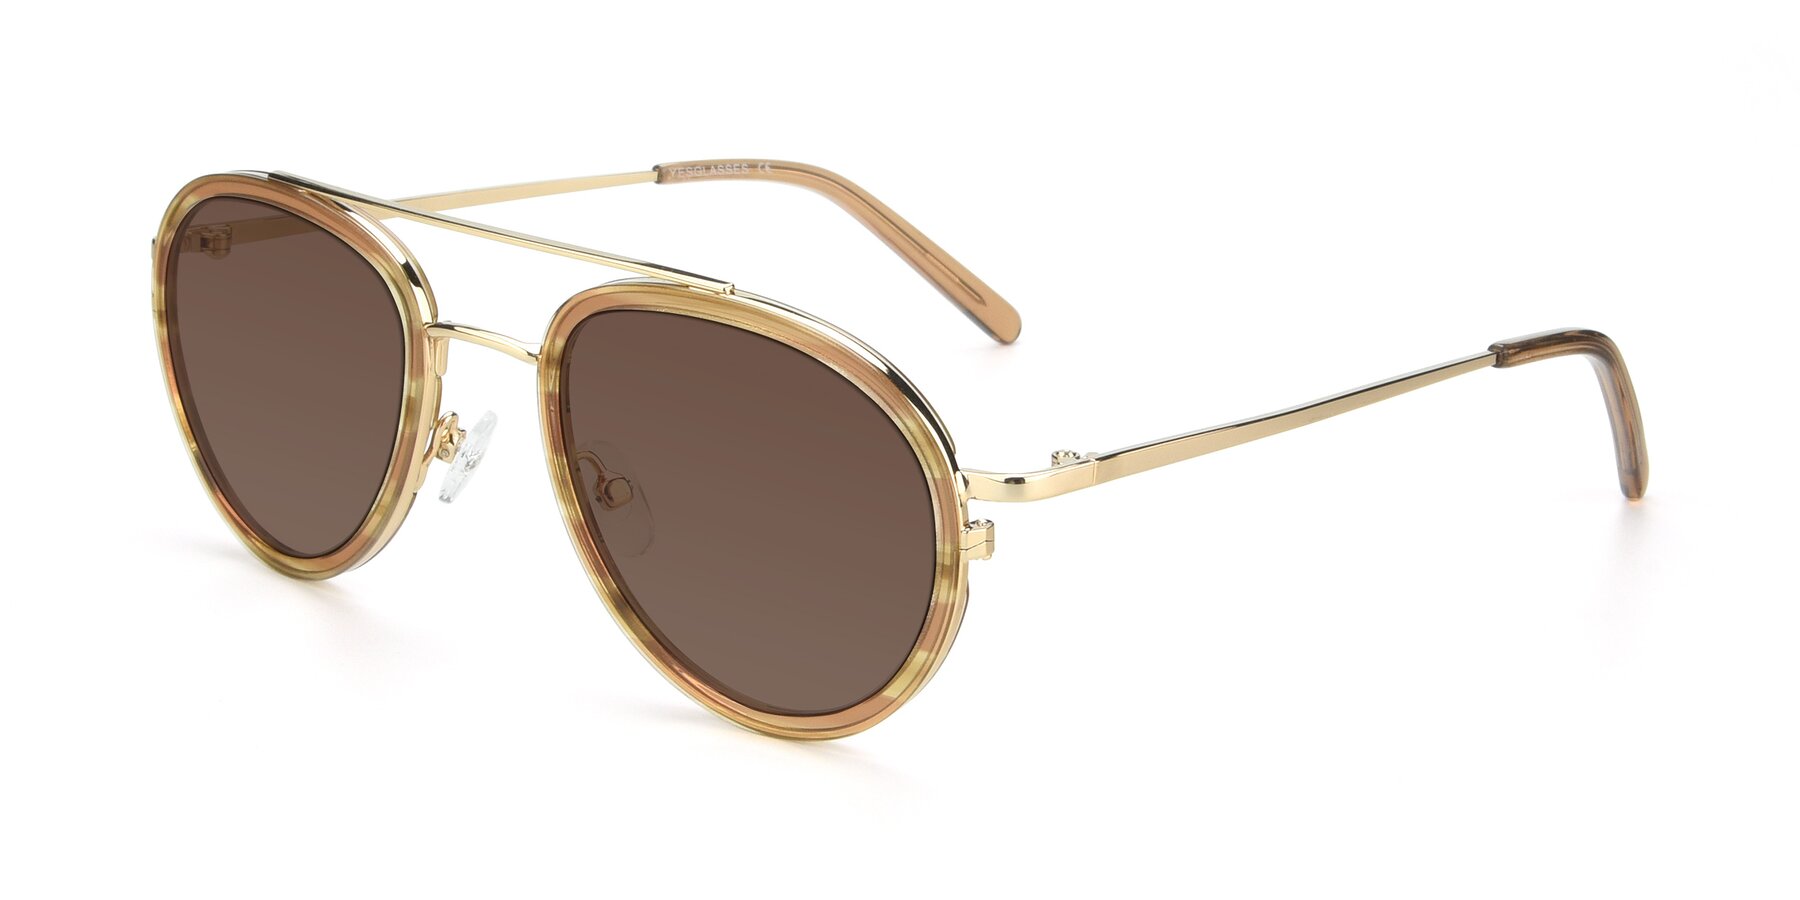 Angle of 9554 in Gold-Caramel with Brown Tinted Lenses